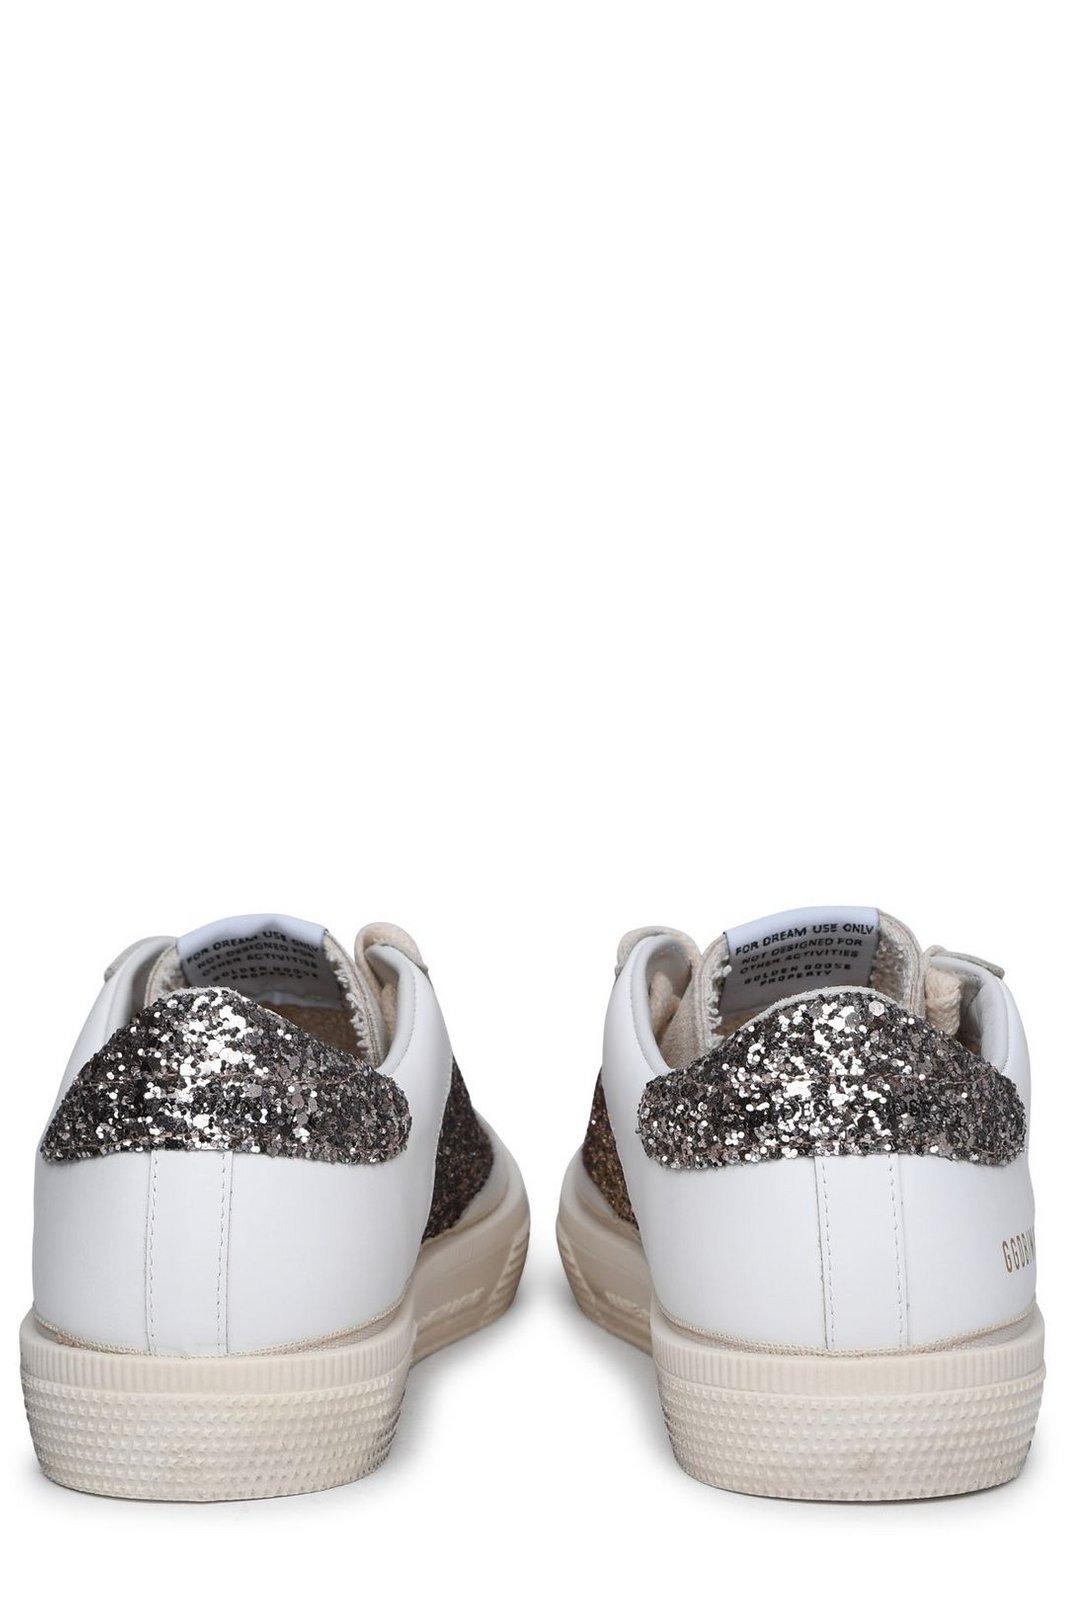 Shop Golden Goose N May Star Glittered Sneakers In Optic White